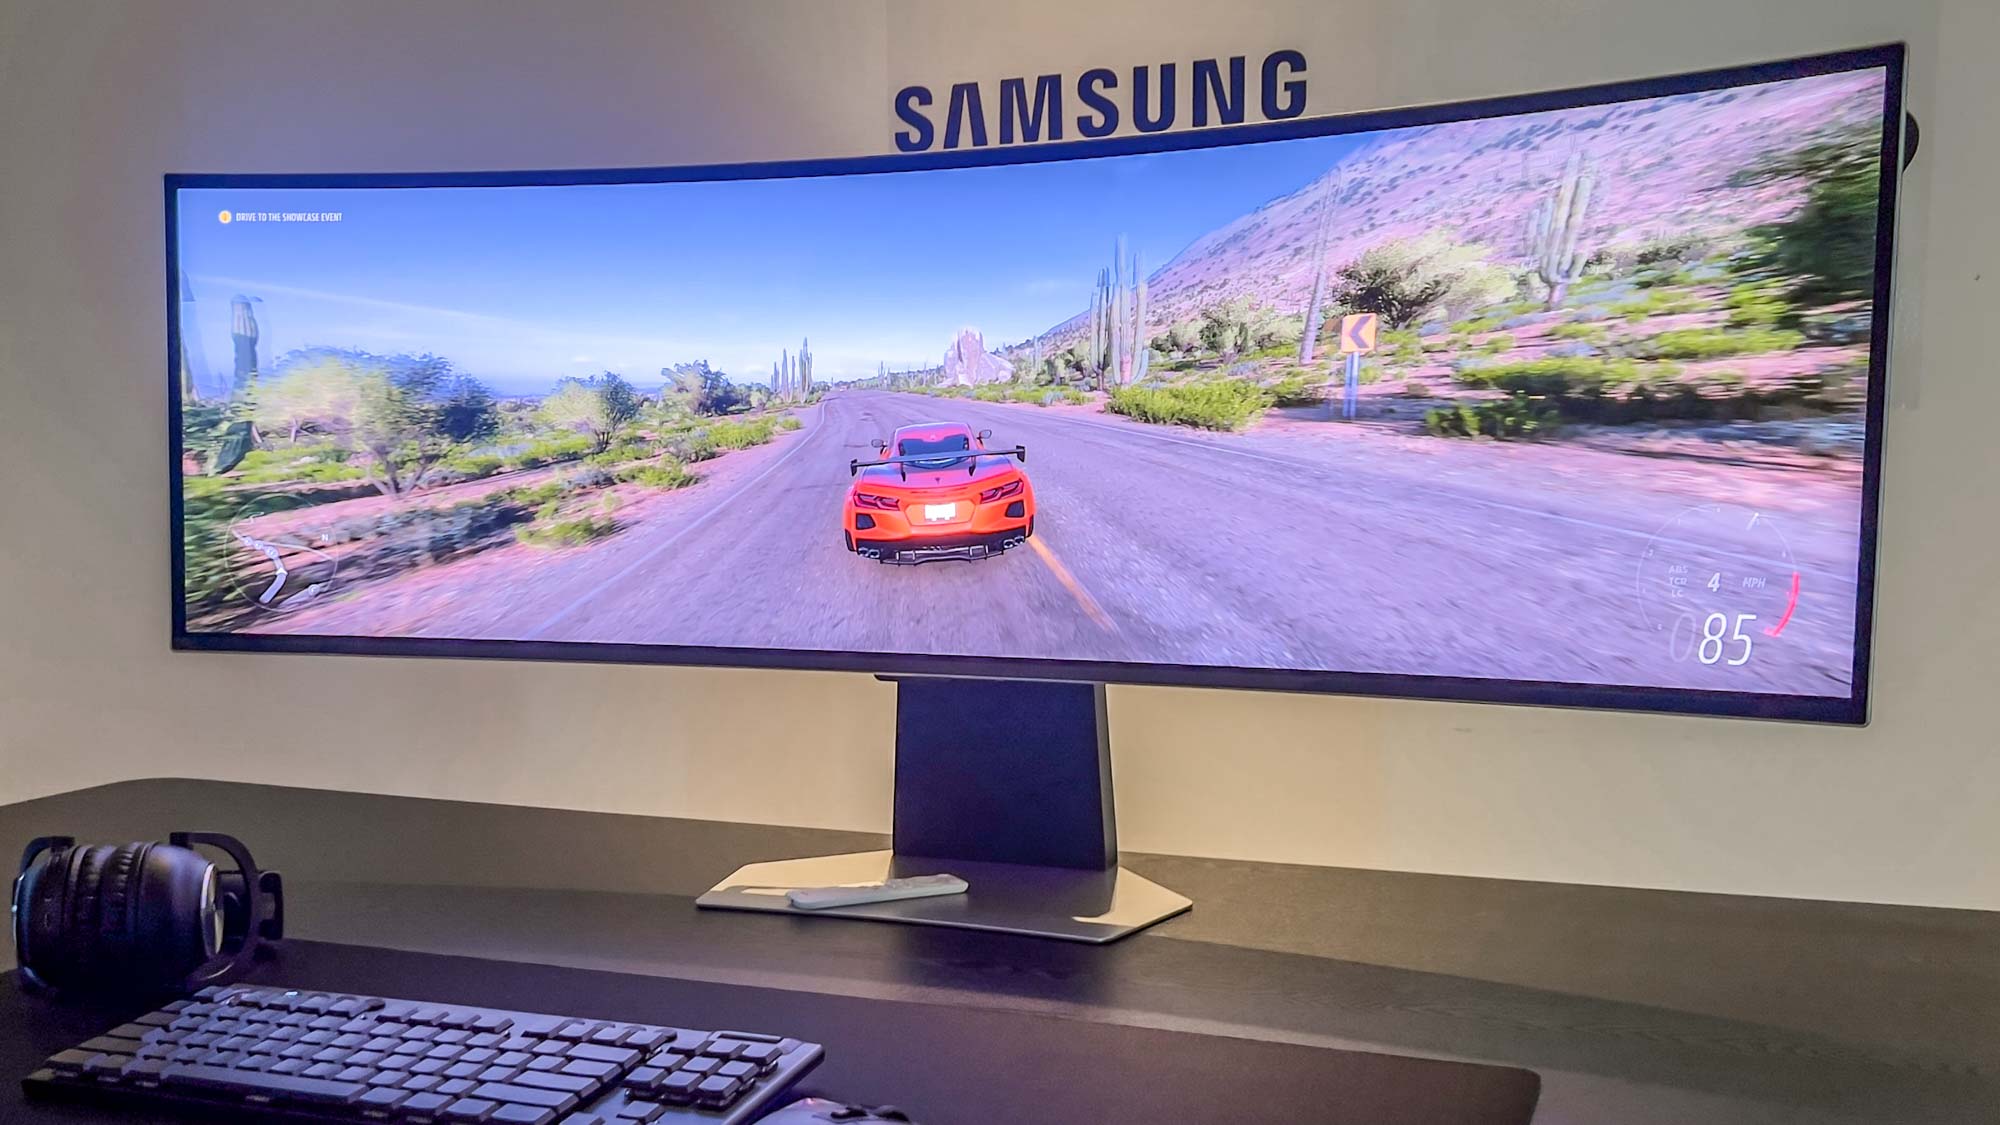 Samsung's 49-inch Odyssey OLED G9 DQHD Gaming Monitor Hits Preorder for  $2,200